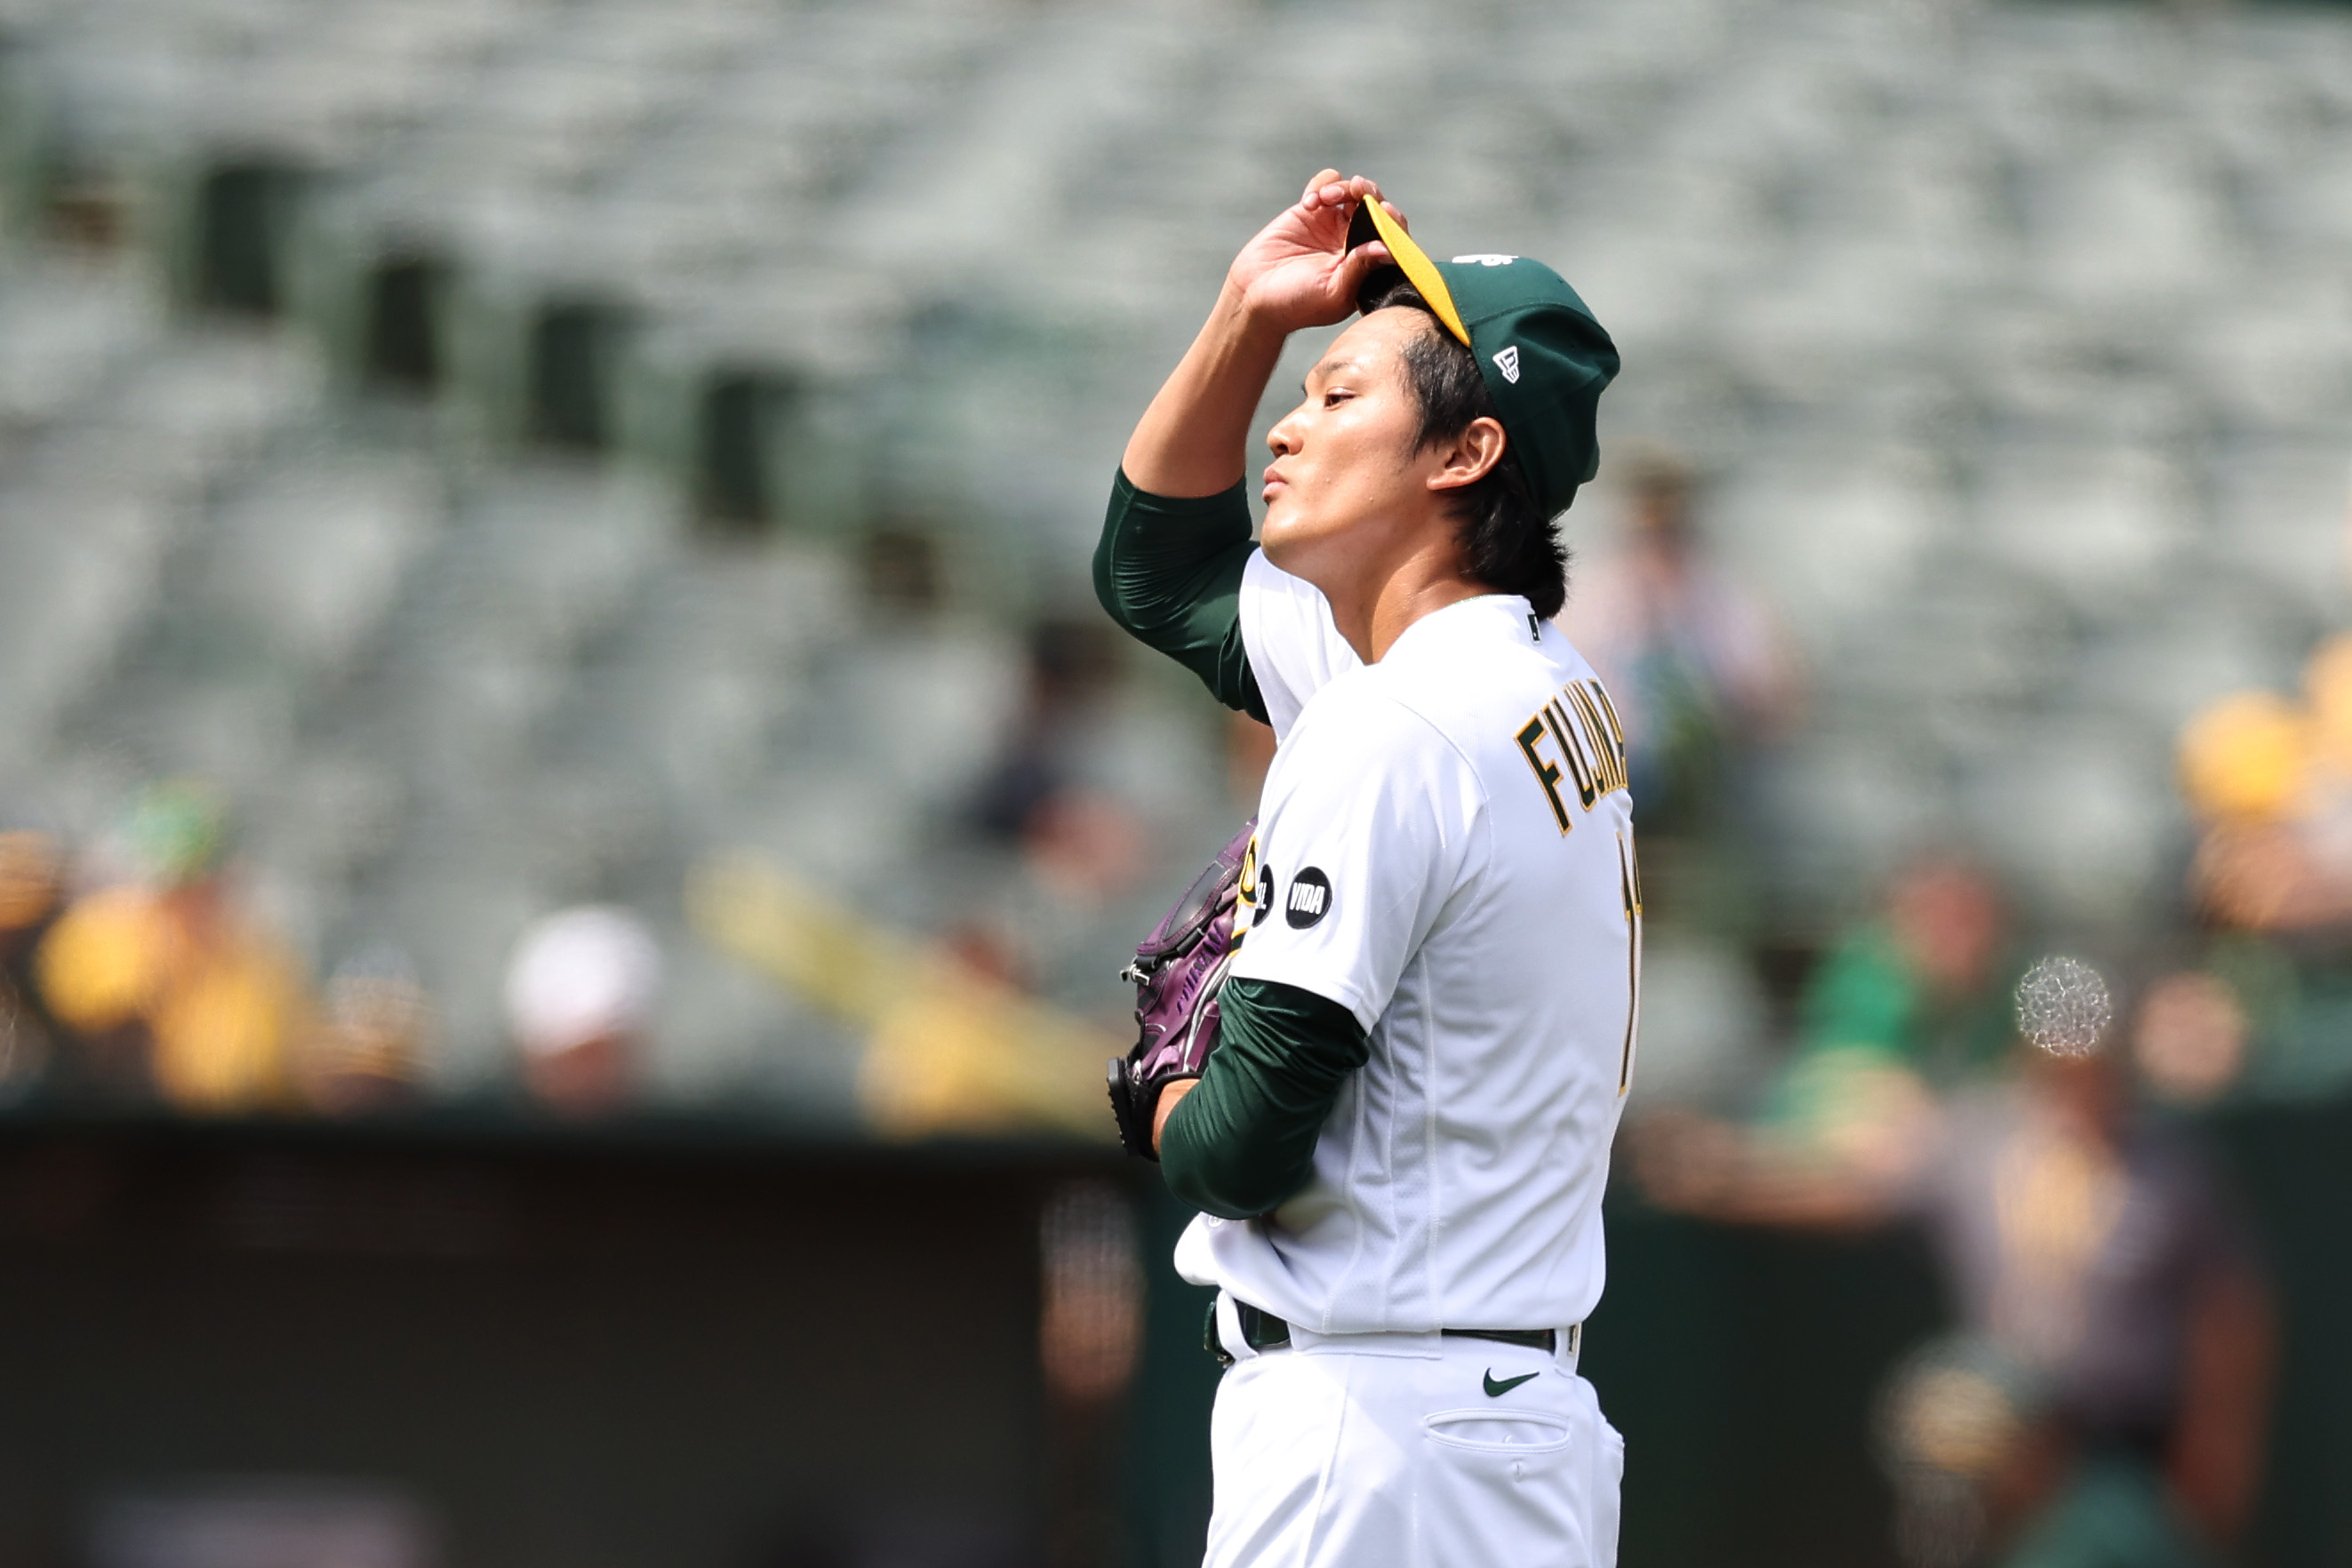 Shintaro Fujinami, in profile, adjusts his cap during an appearance with the Oakland A's on July 16.